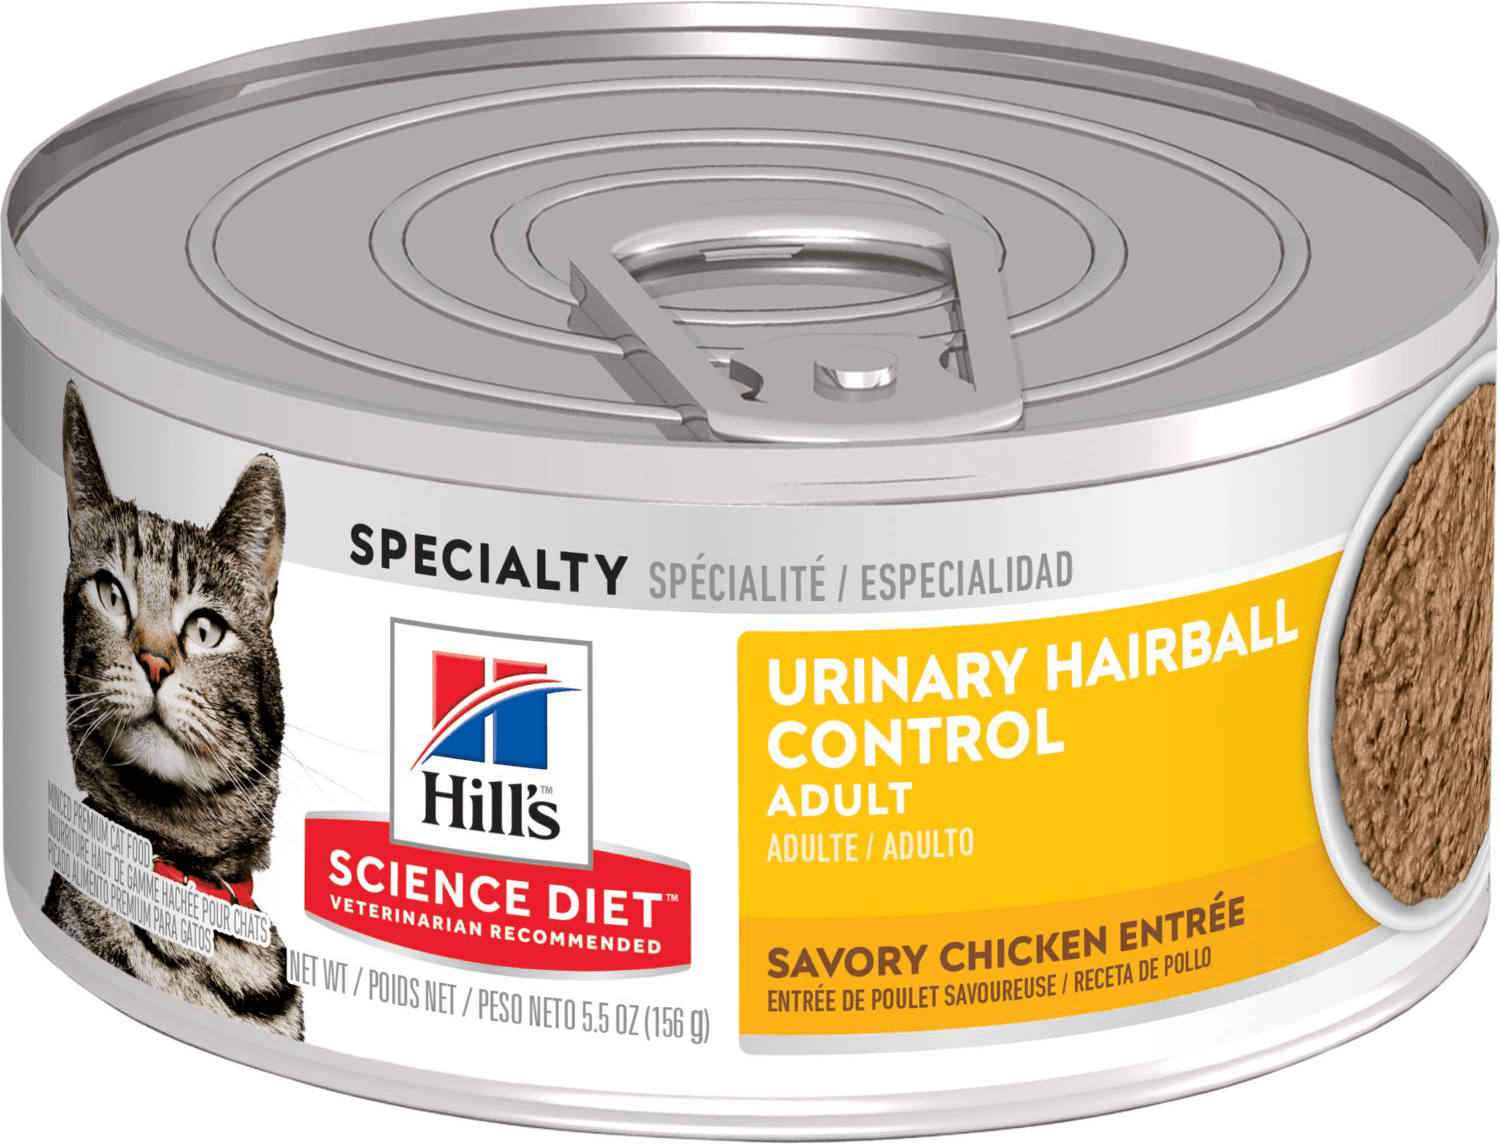 Hill's Science Diet Adult Urinary Hairball Control Savory Chicken Entrée